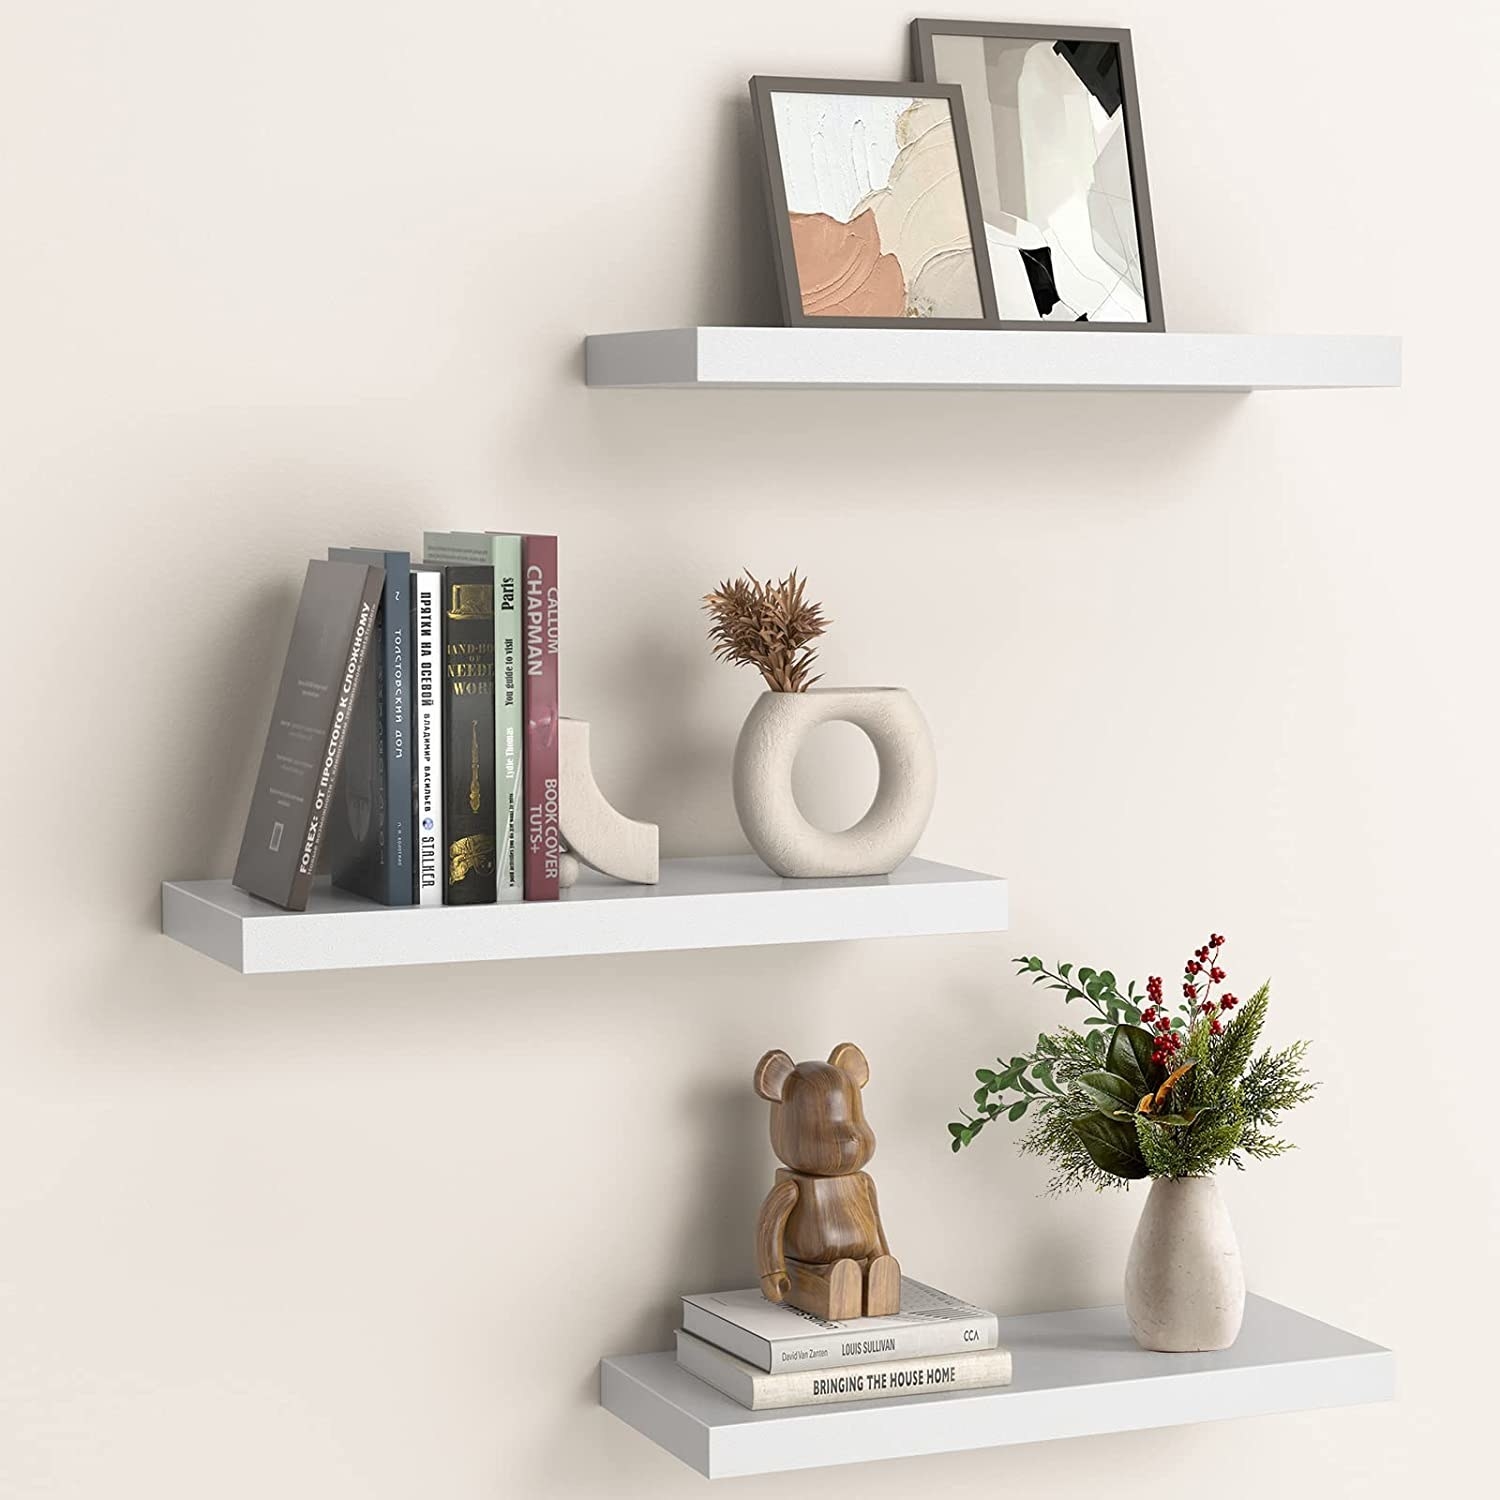 three shelves with books, plants, and other trinkets on them